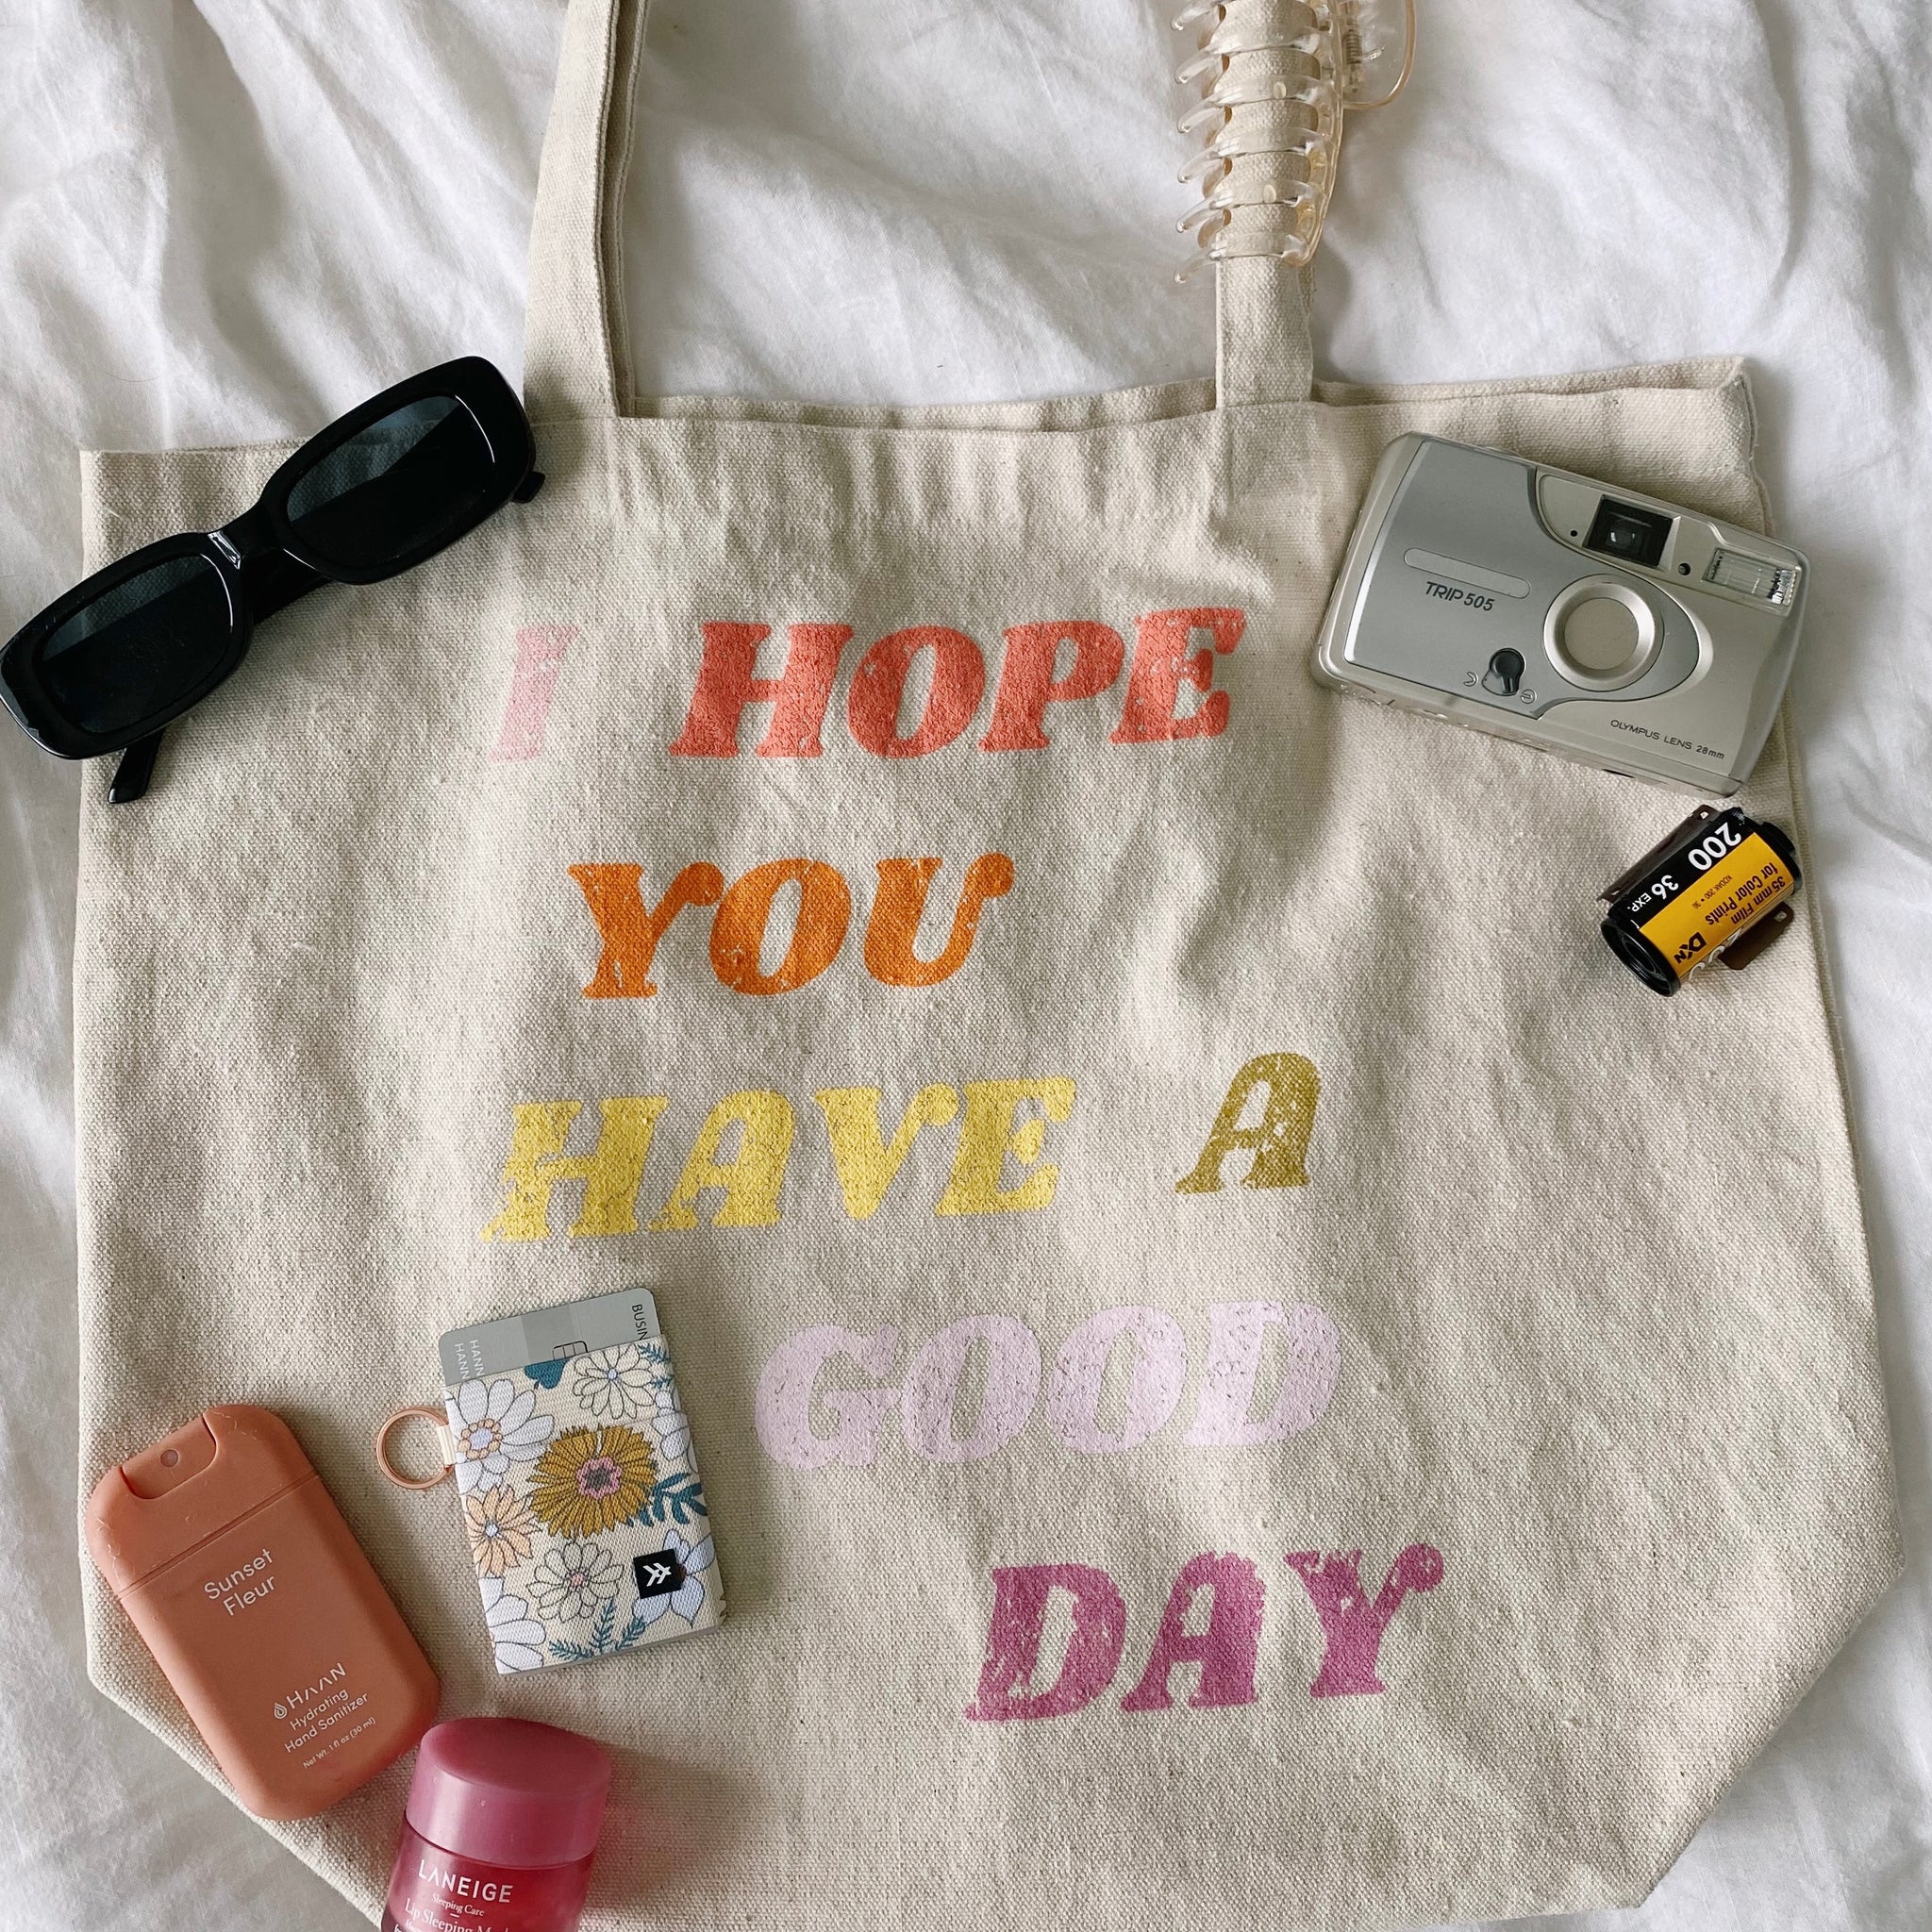 “GOOD DAY” TOTE